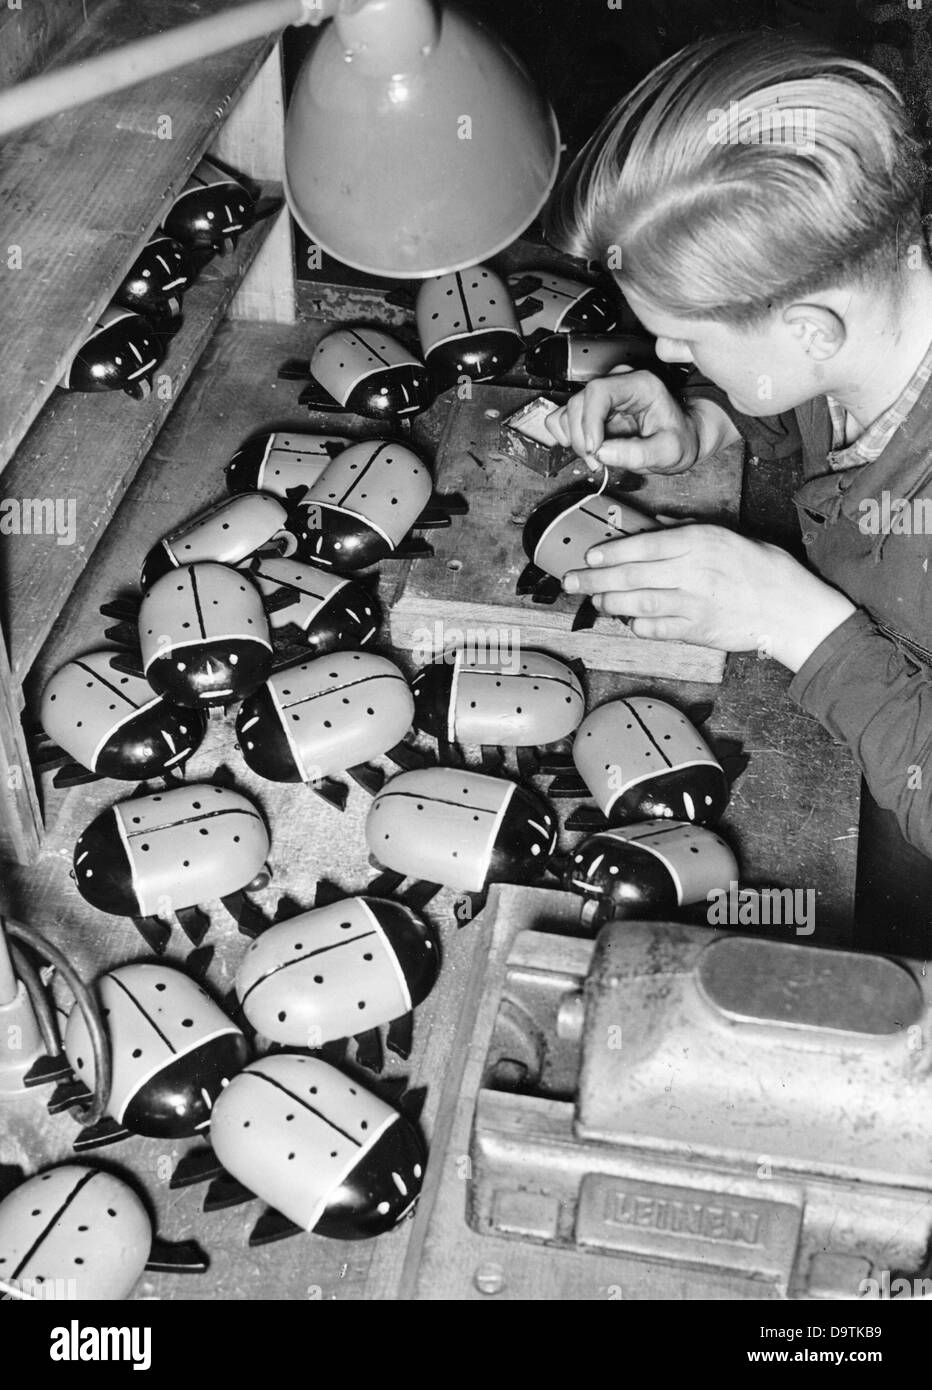 Hitler Youth boys are producing toys for Christmas, in November 1942, at a factory of armament works, for the wartime service of the Hitler Youth. Fotoarchiv für Zeitgeschichte Stock Photo